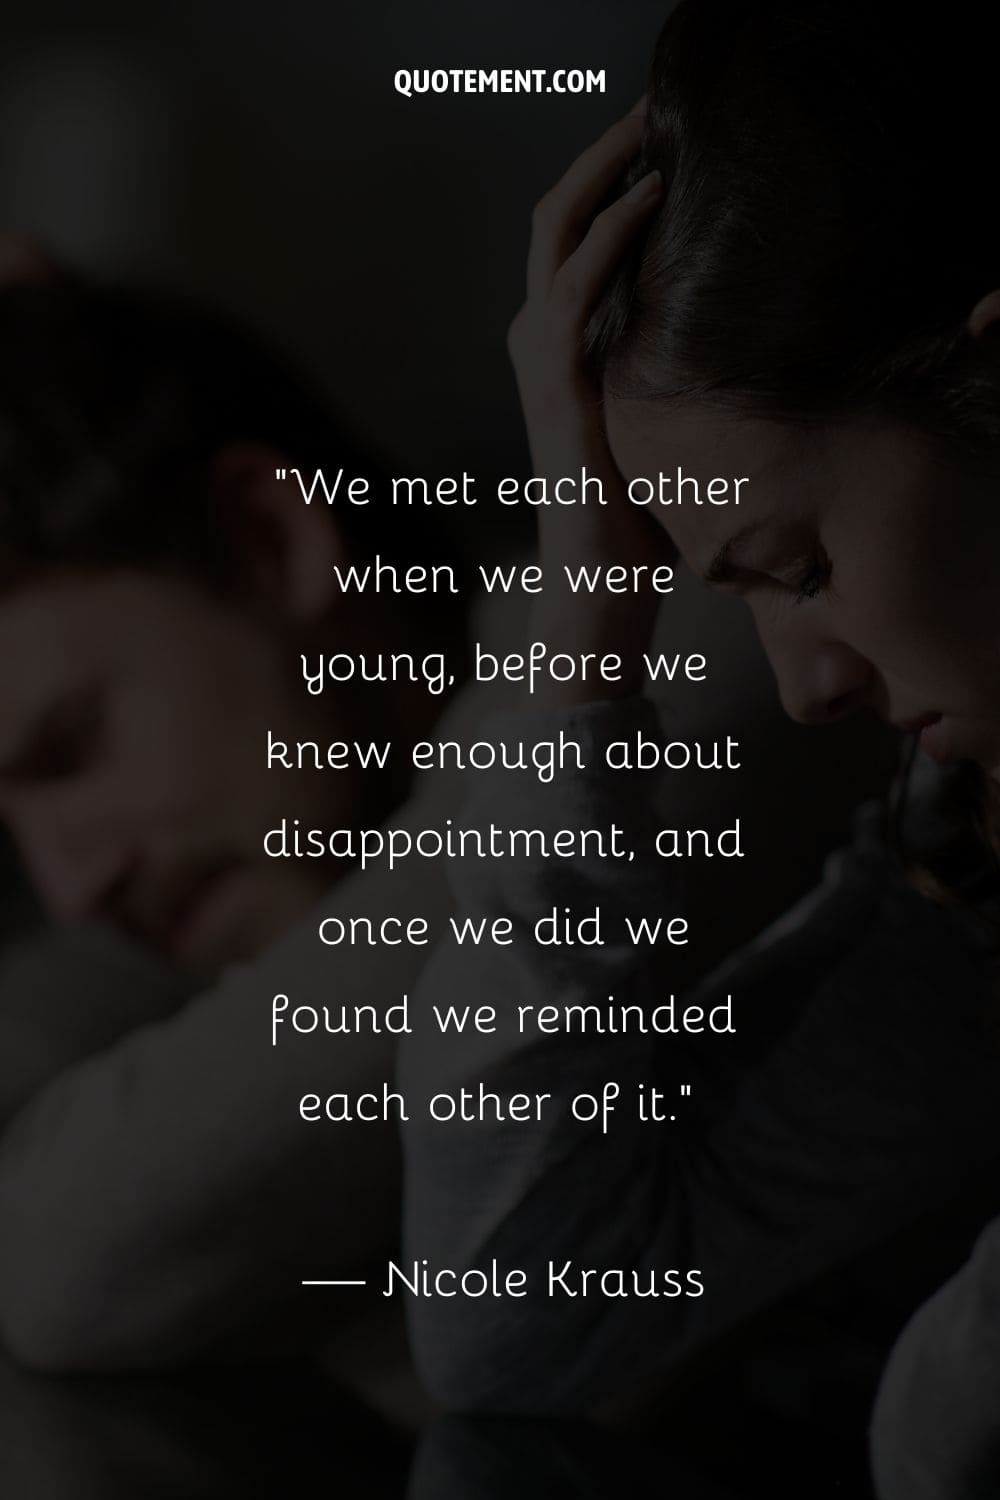 We met each other when we were young, before we knew enough about disappointment, and once we did we found we reminded each other of it